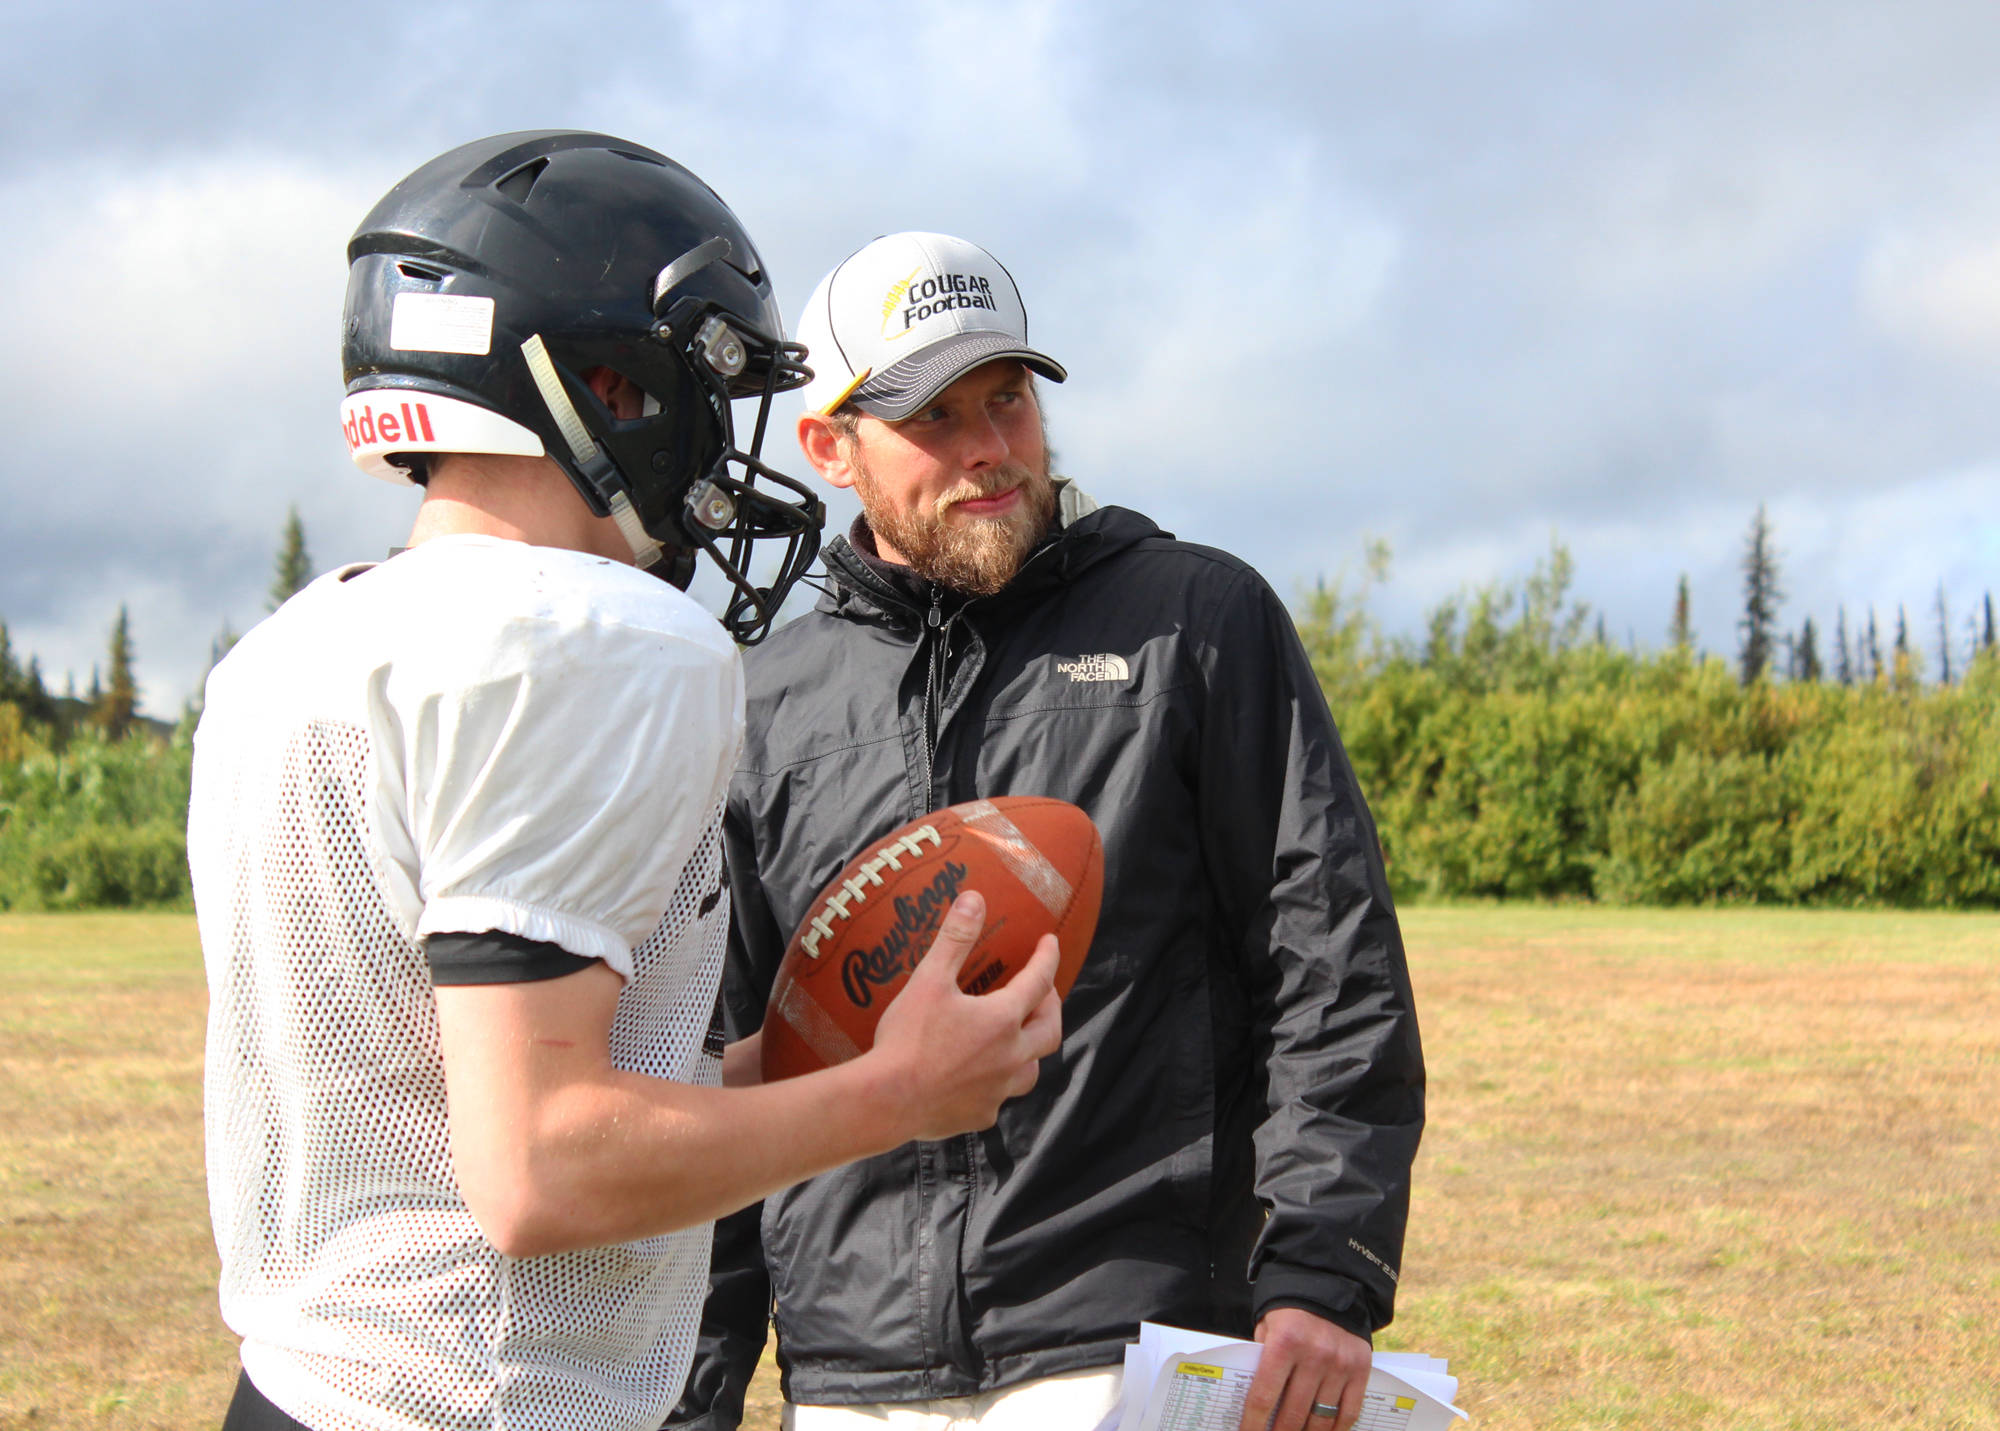 Justin Zank, head coach of the Cougars football team, looks on during a practice Friday, Sept. 1, 2017 at McNeil Canyon Elementary in Fritz Creek, Alaska. Zank, with help from the school district and administration, brought the players from Russian Old Believer schools Voznesenka, Razdolna and Kachemak-Selo from an eight-man team to a varsity 11-man program five years ago. (Photo by Megan Pacer/Homer News)